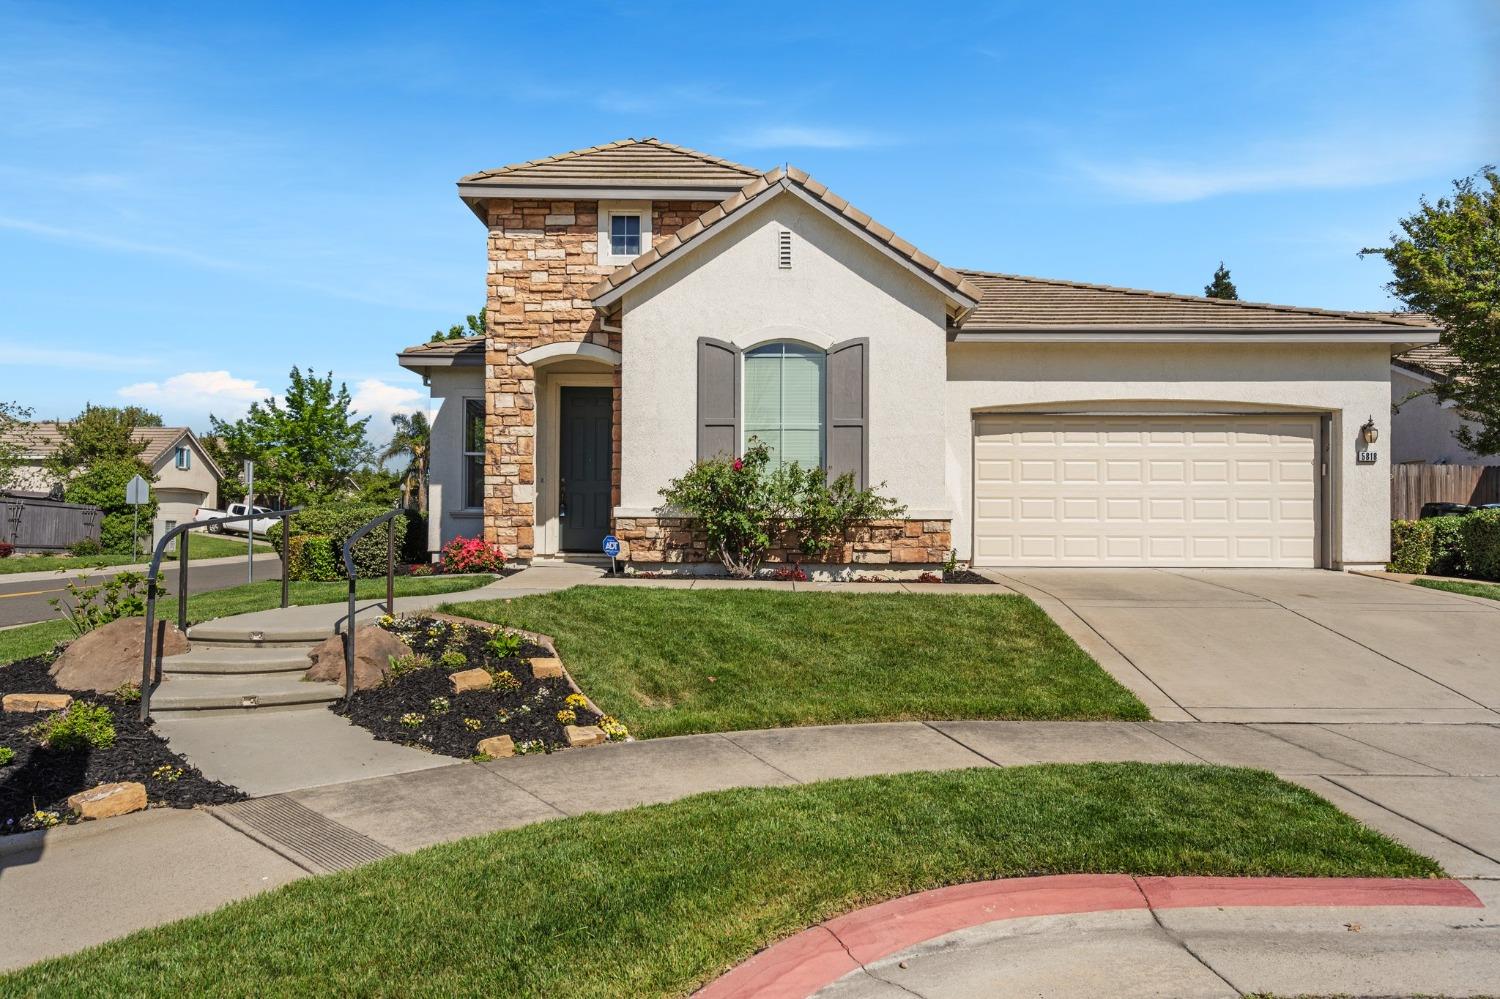 This North Natomas home is the definition of GOLD STANDARD! Drive up to a cute corner lot with plush